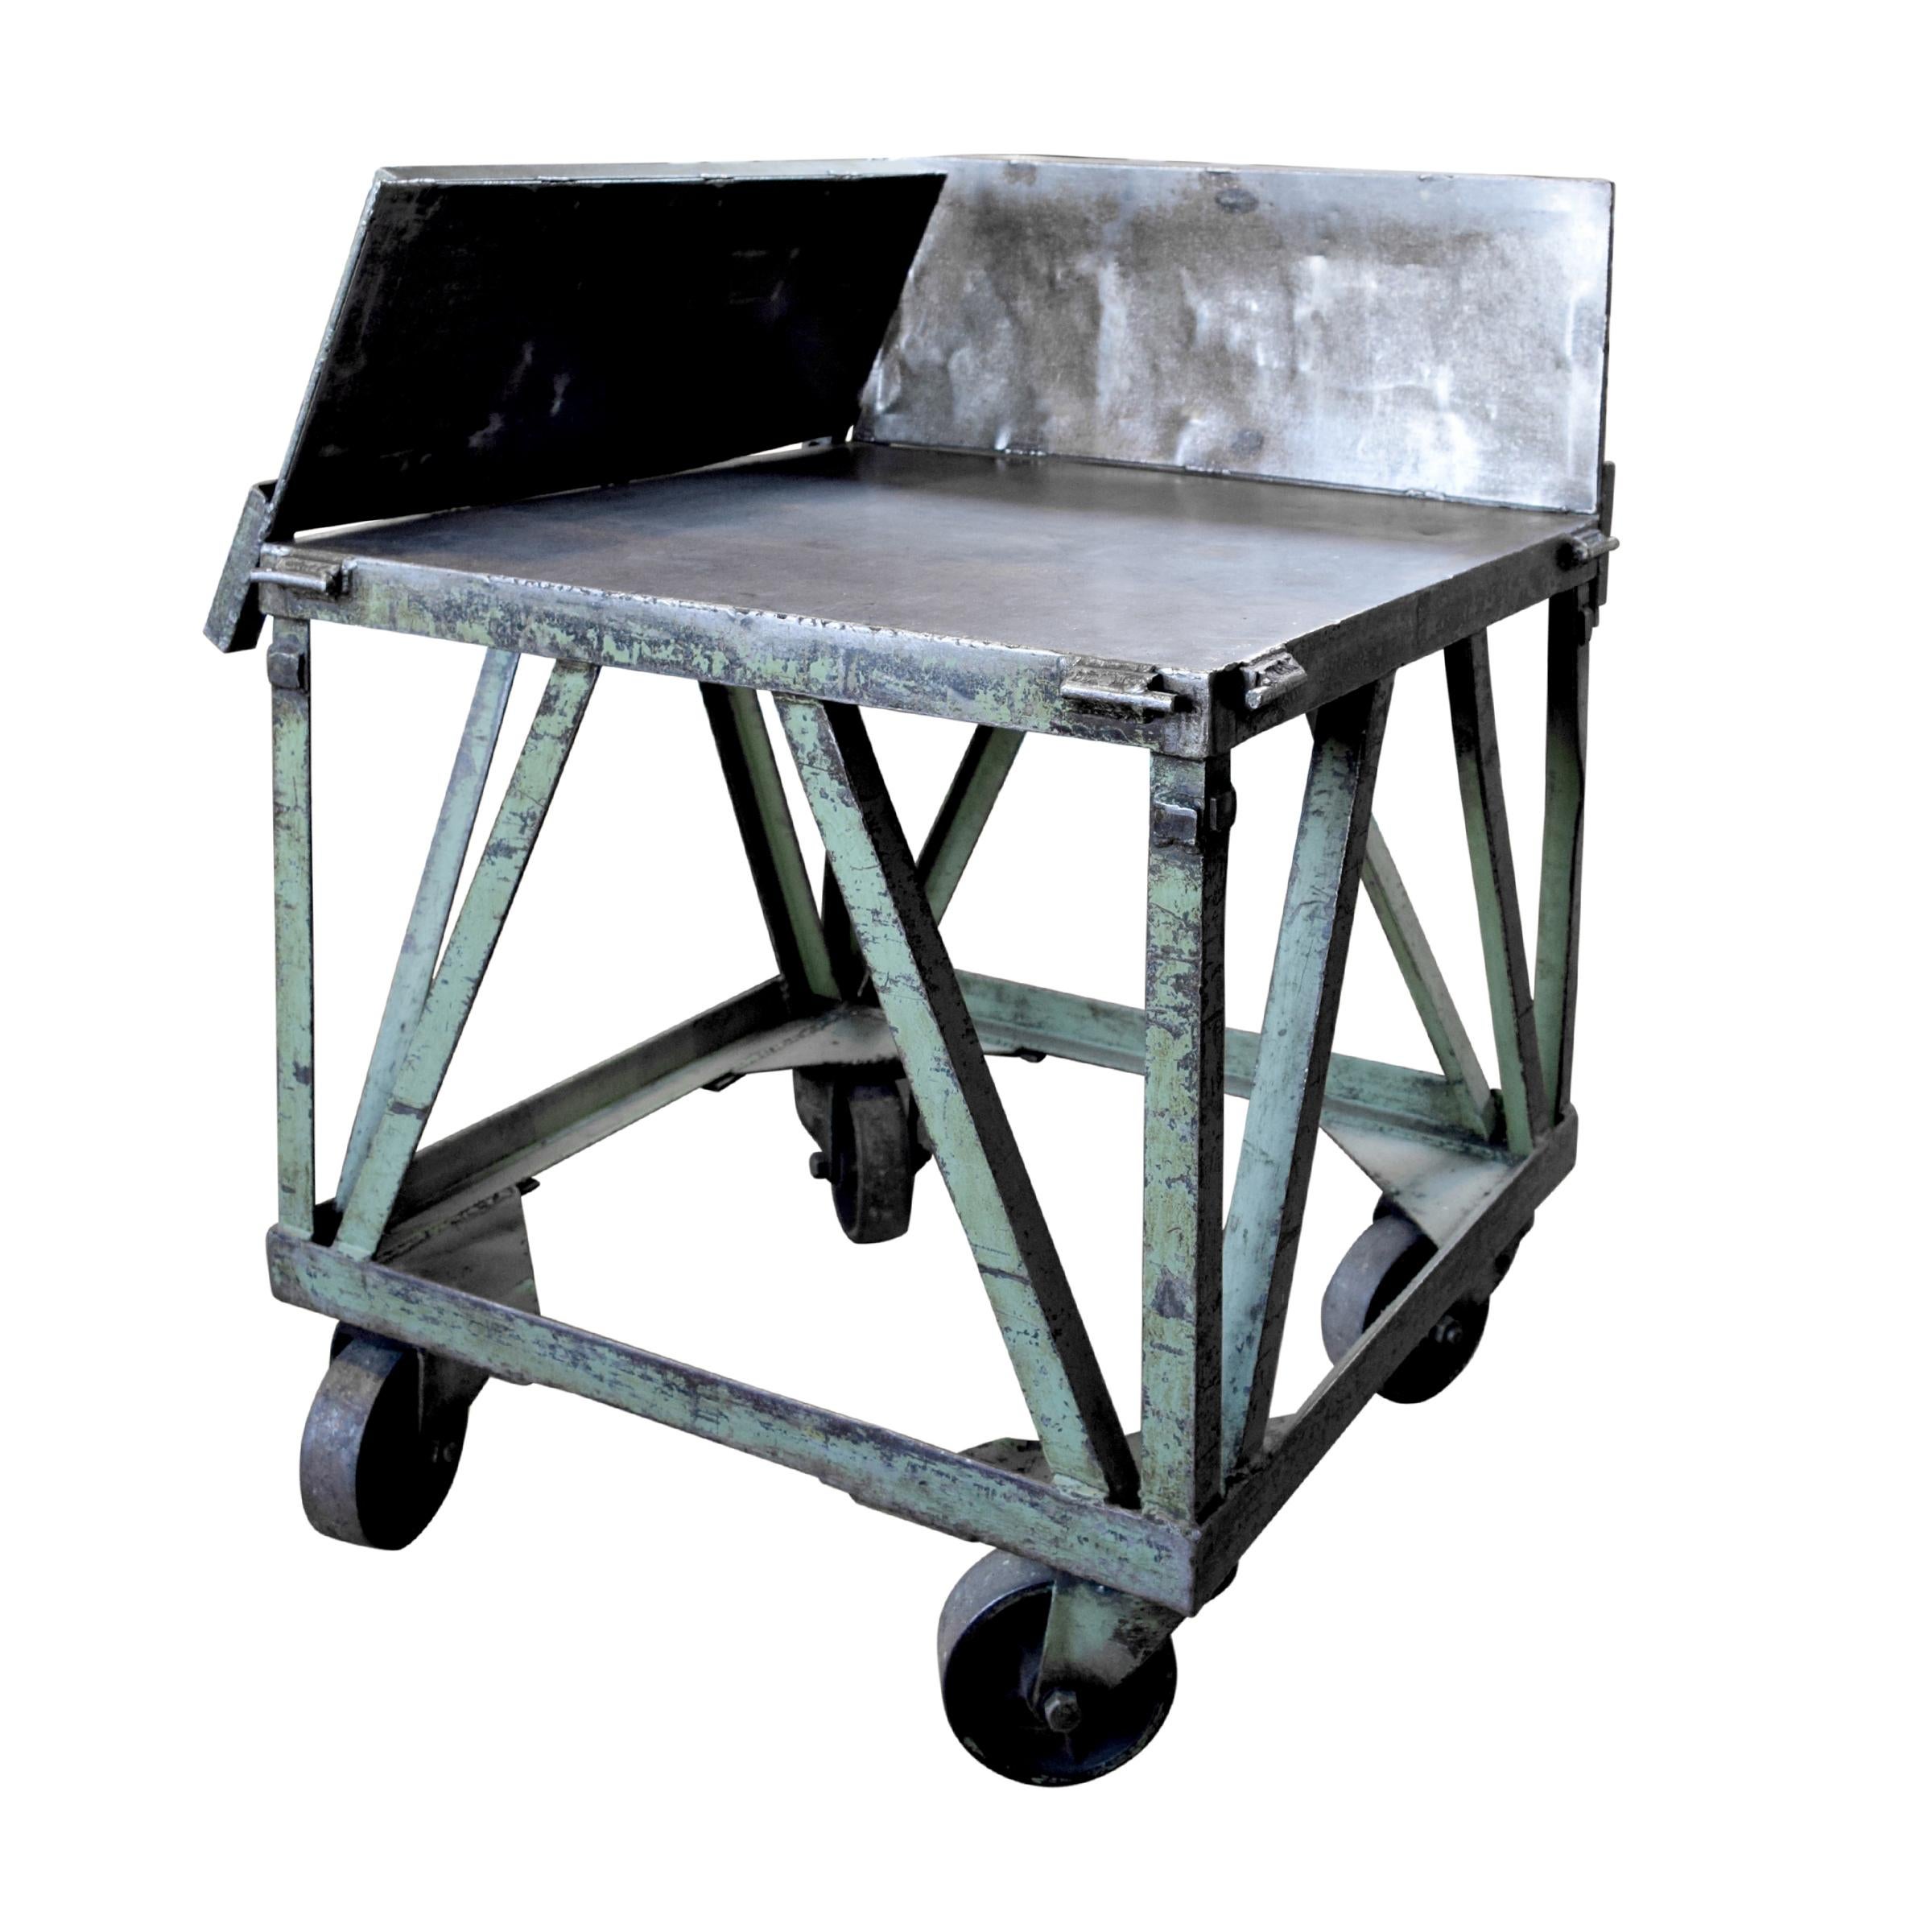 An early 20th century American industrial cart from a print shop with four flip up sides and large casters.